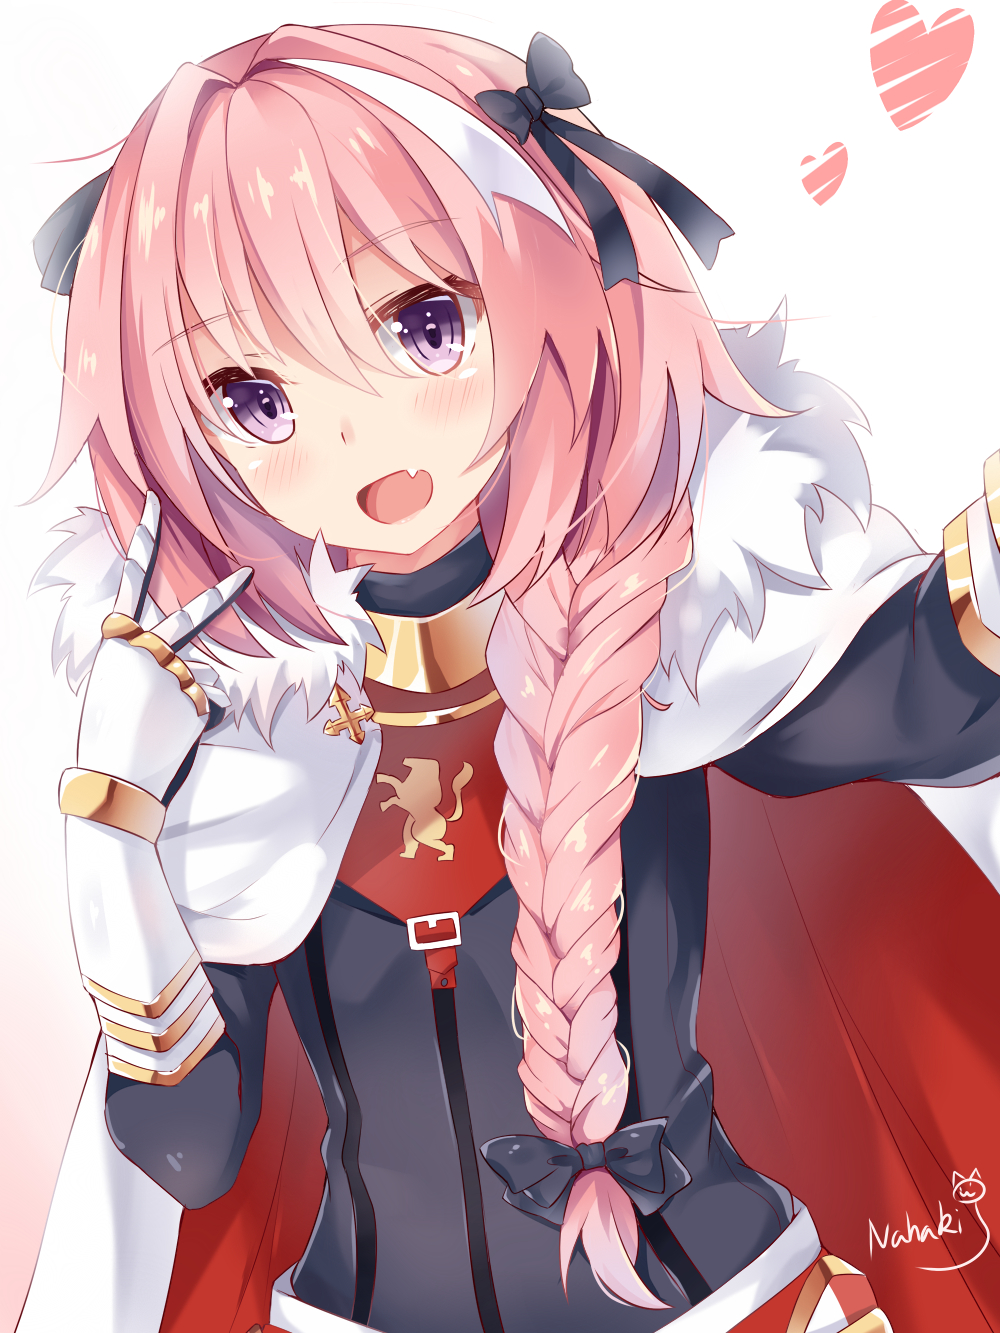 is What from anime astolfo